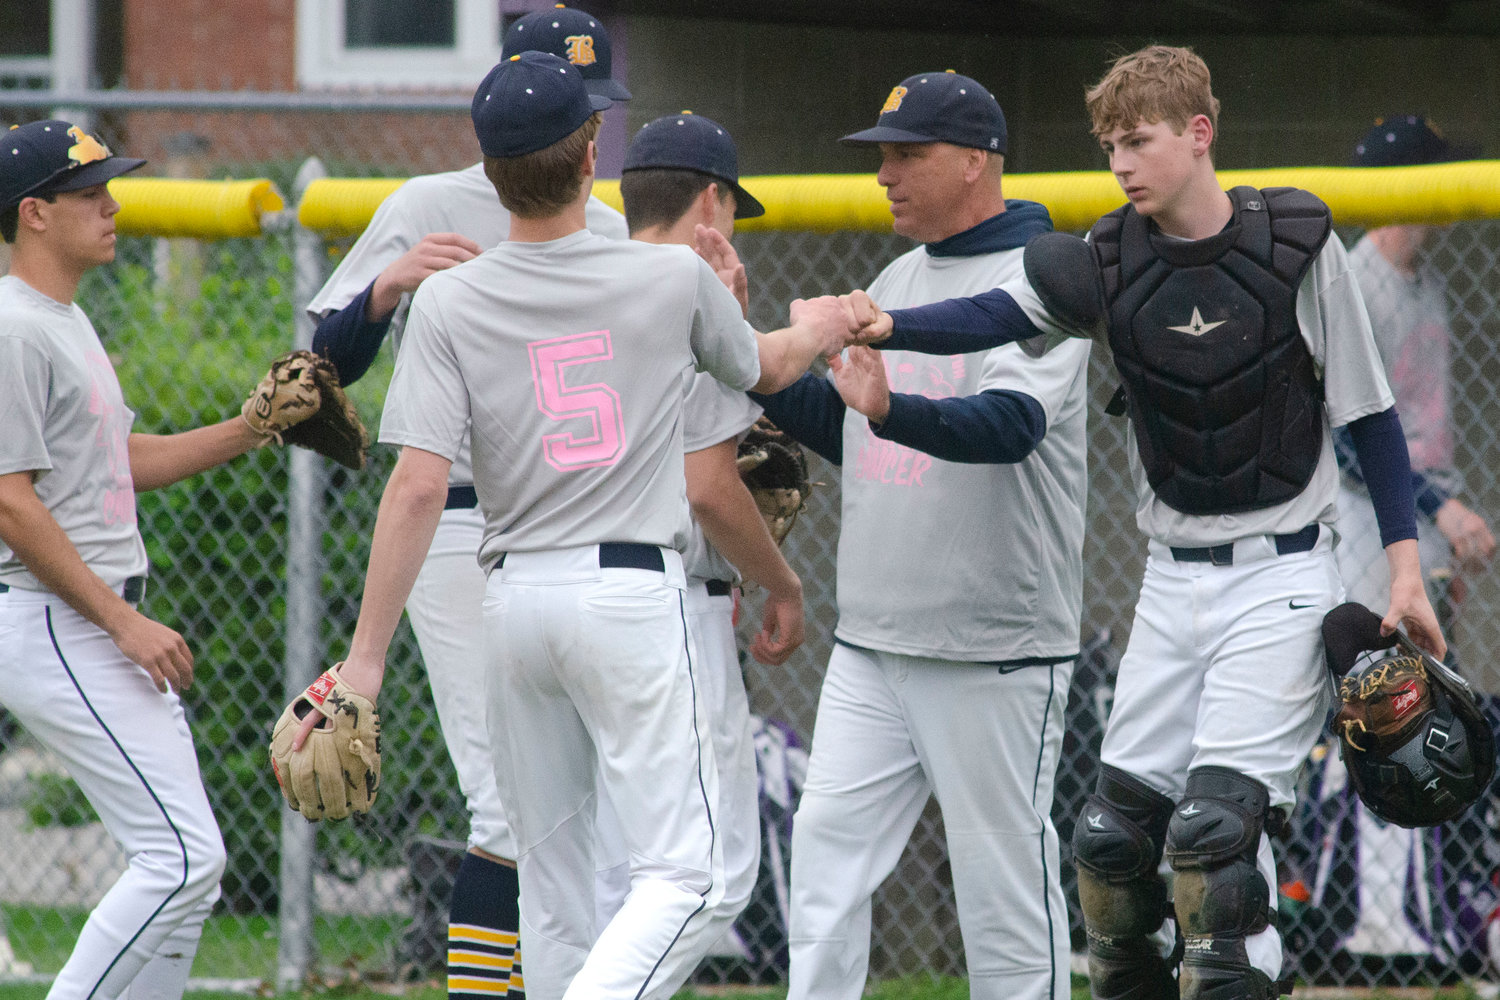 Barrington High School Baseball Coach Vin Scandura and catcher Evan Anderson fist-bump teammates as they run off the field after a clean inning against the Huskies on Friday. The two teams played a special benefit baseball game to raise money for Jimmy Fund.